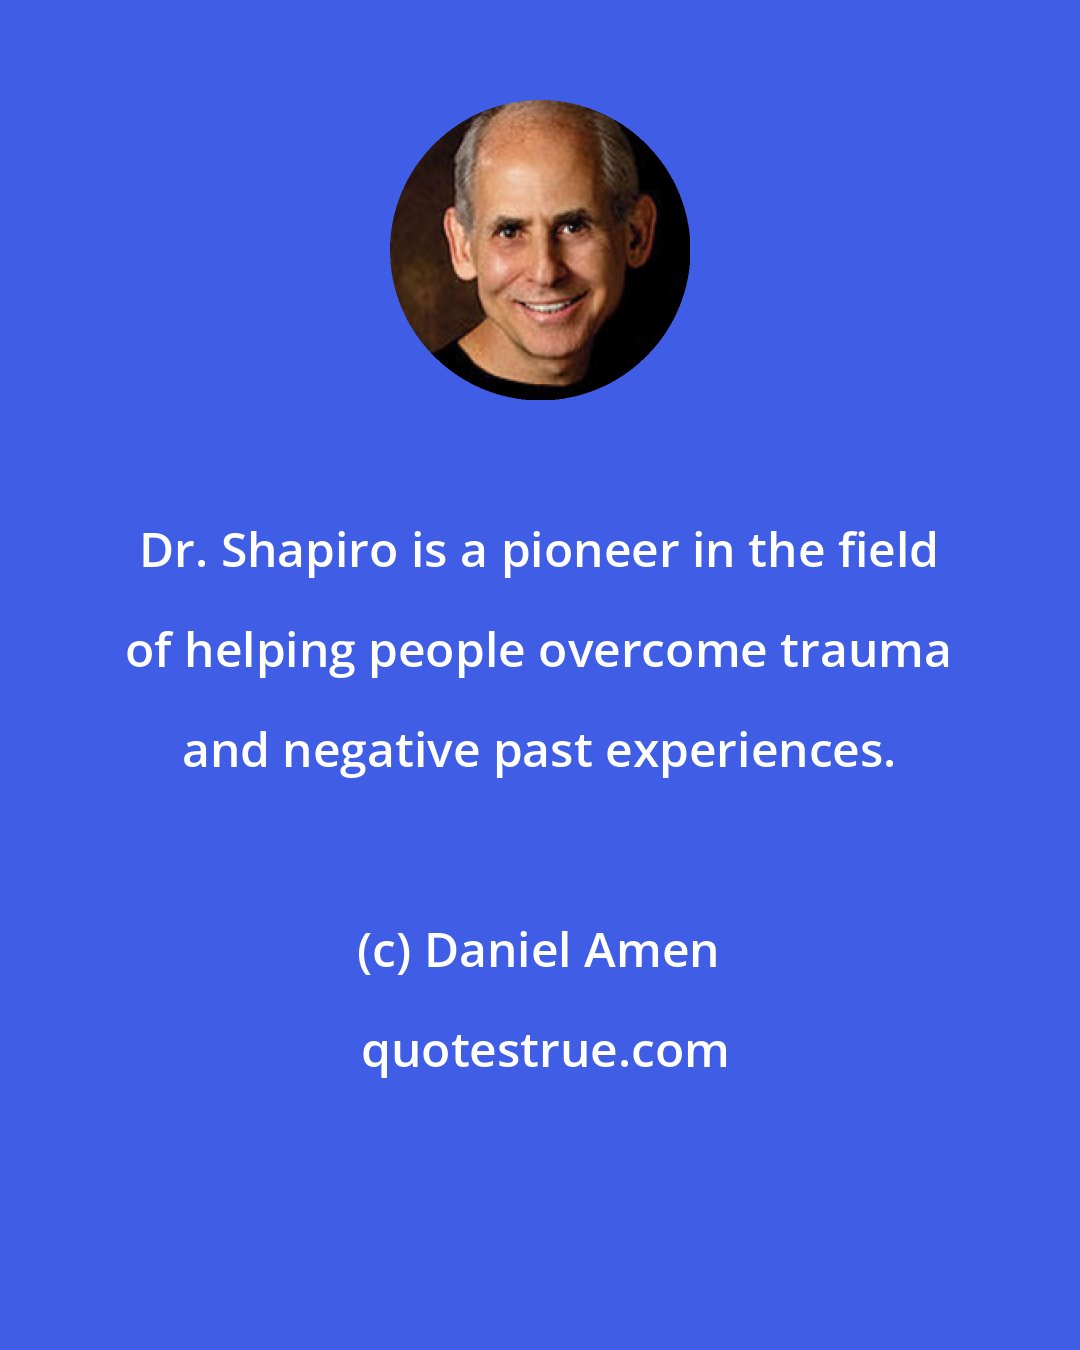 Daniel Amen: Dr. Shapiro is a pioneer in the field of helping people overcome trauma and negative past experiences.